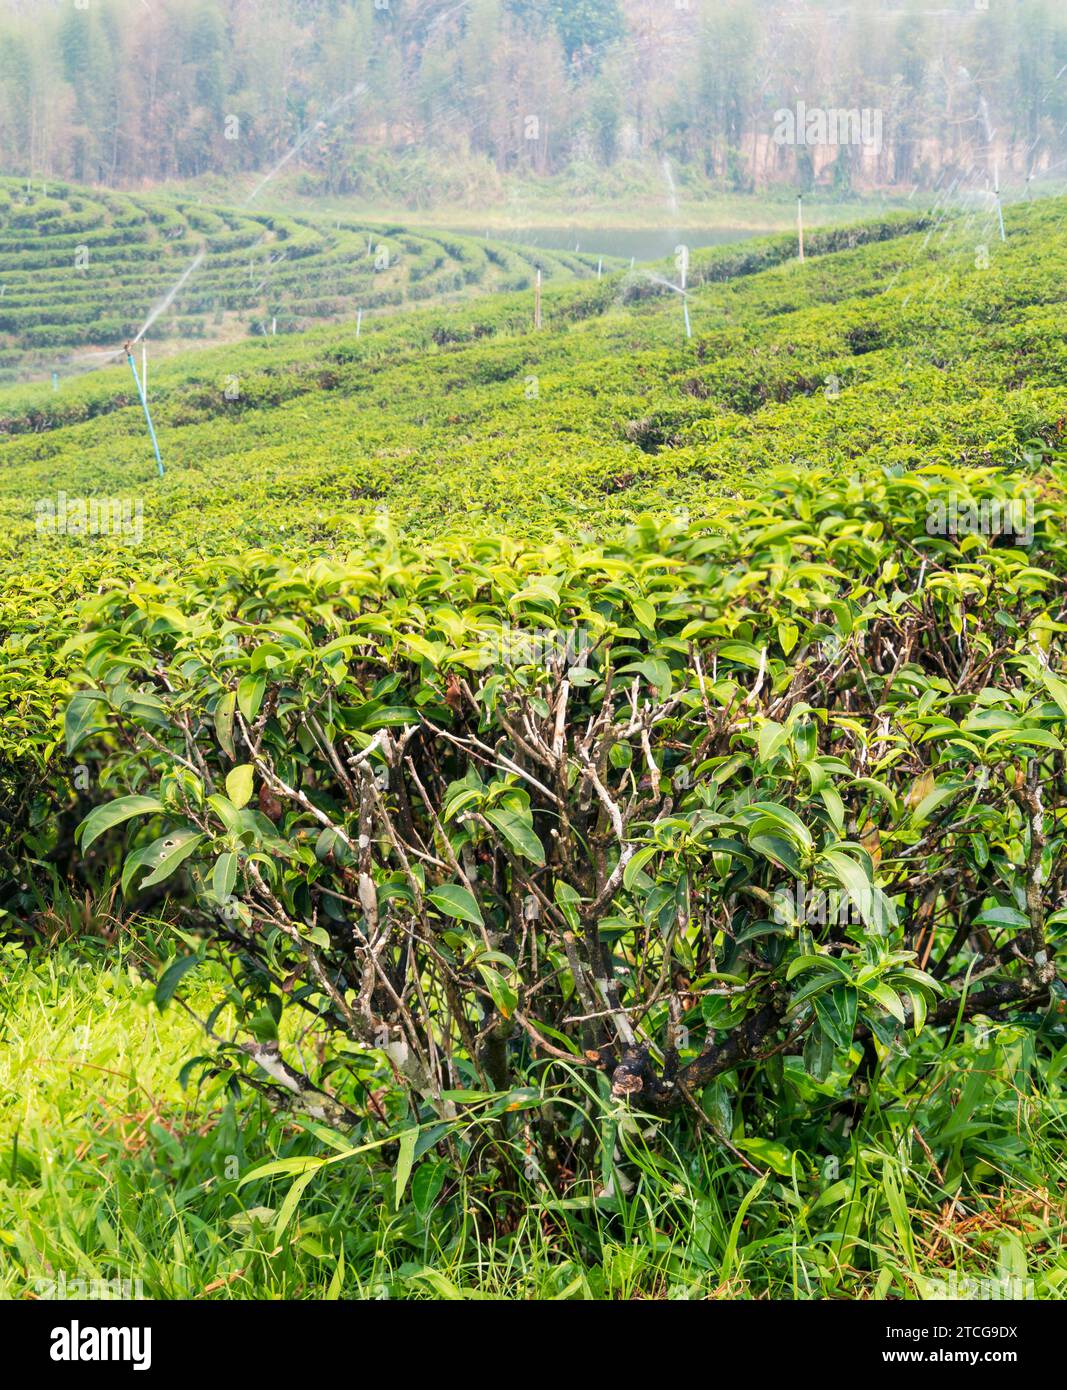 Thai tea plants,regularily sprinkled with water to keep healthy,in one of Thailand's big tea growing areas. A hazy,smokey landscape,during Thailand's Stock Photo